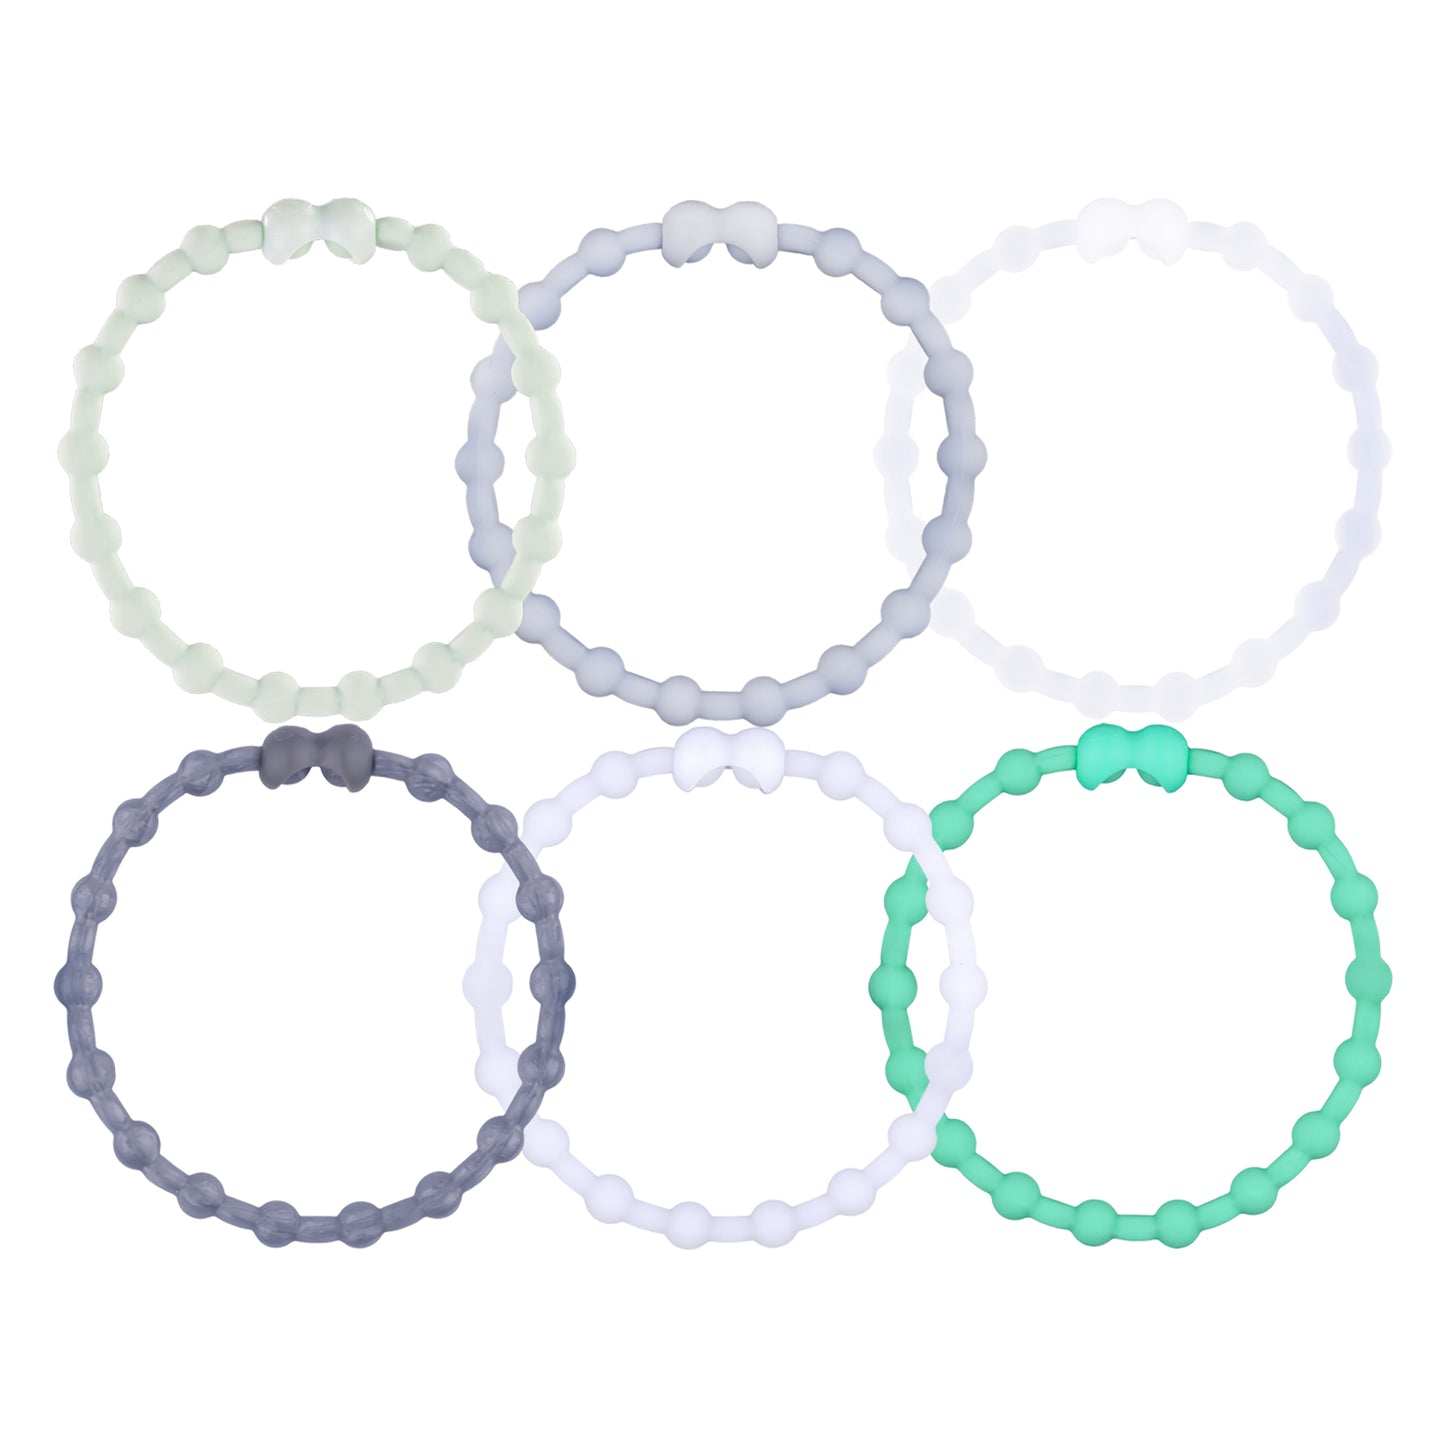 Icy Elegance Pack PRO Hair Ties (6-Pack): Cool Sophistication for Every Style